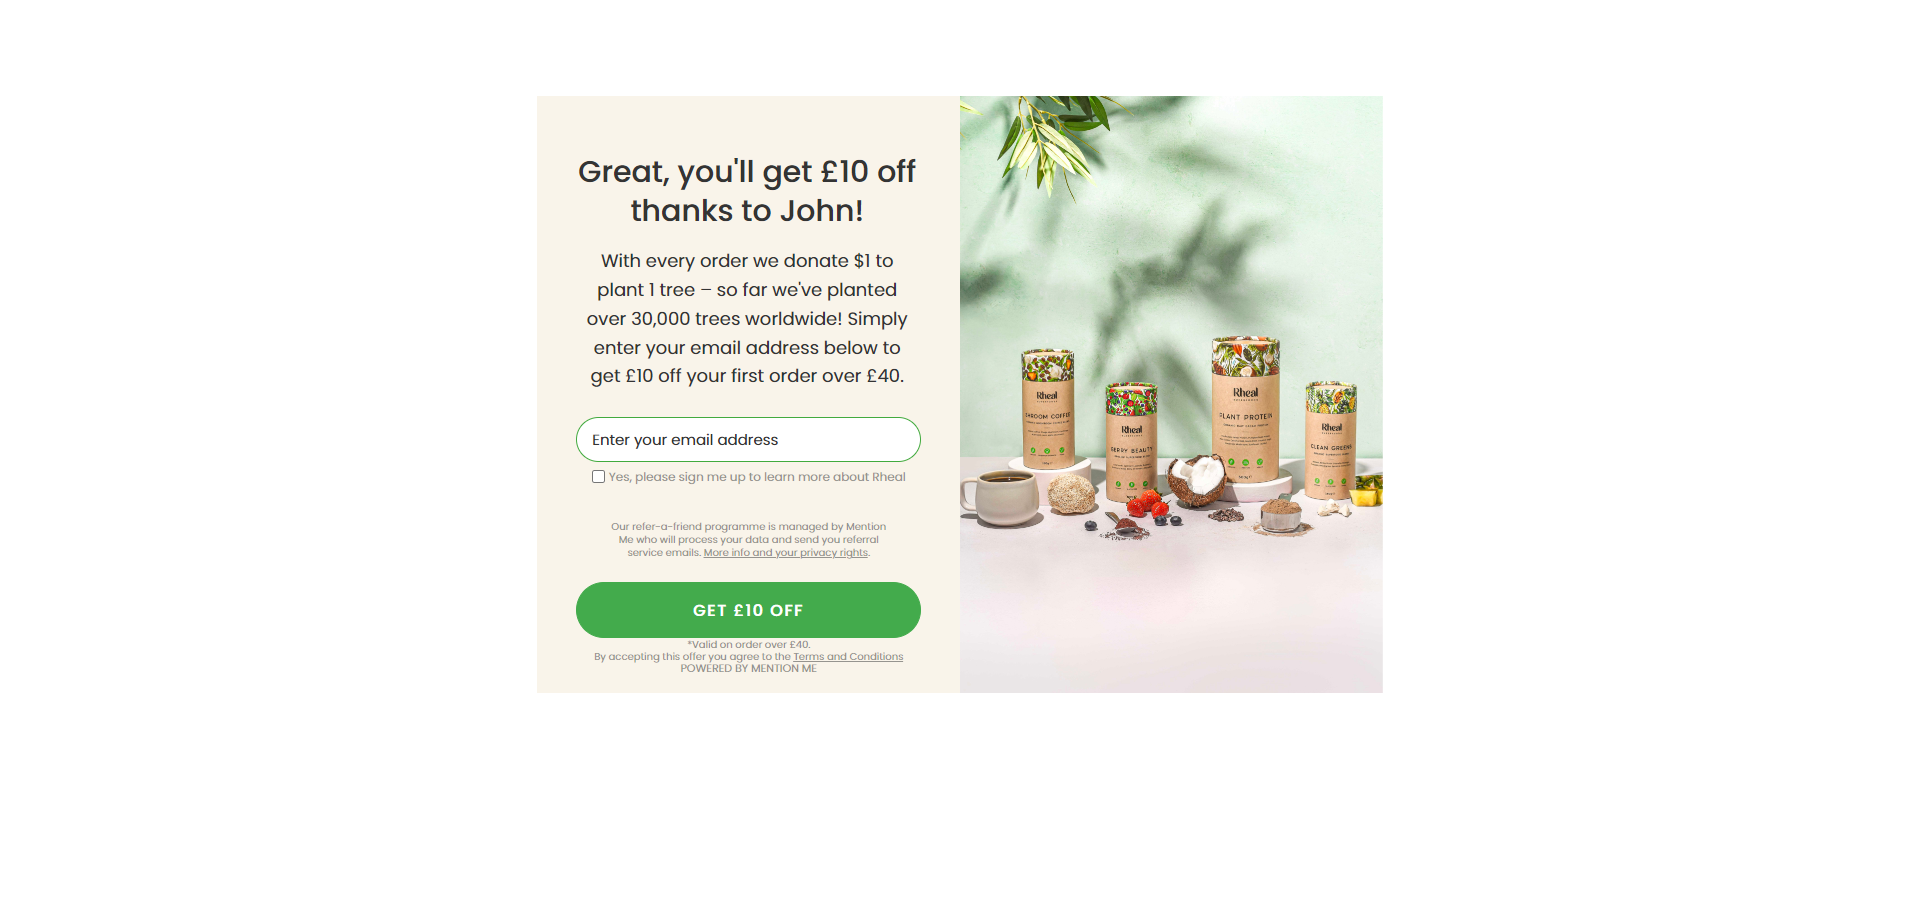 Landing Page for Rheal Superfoods